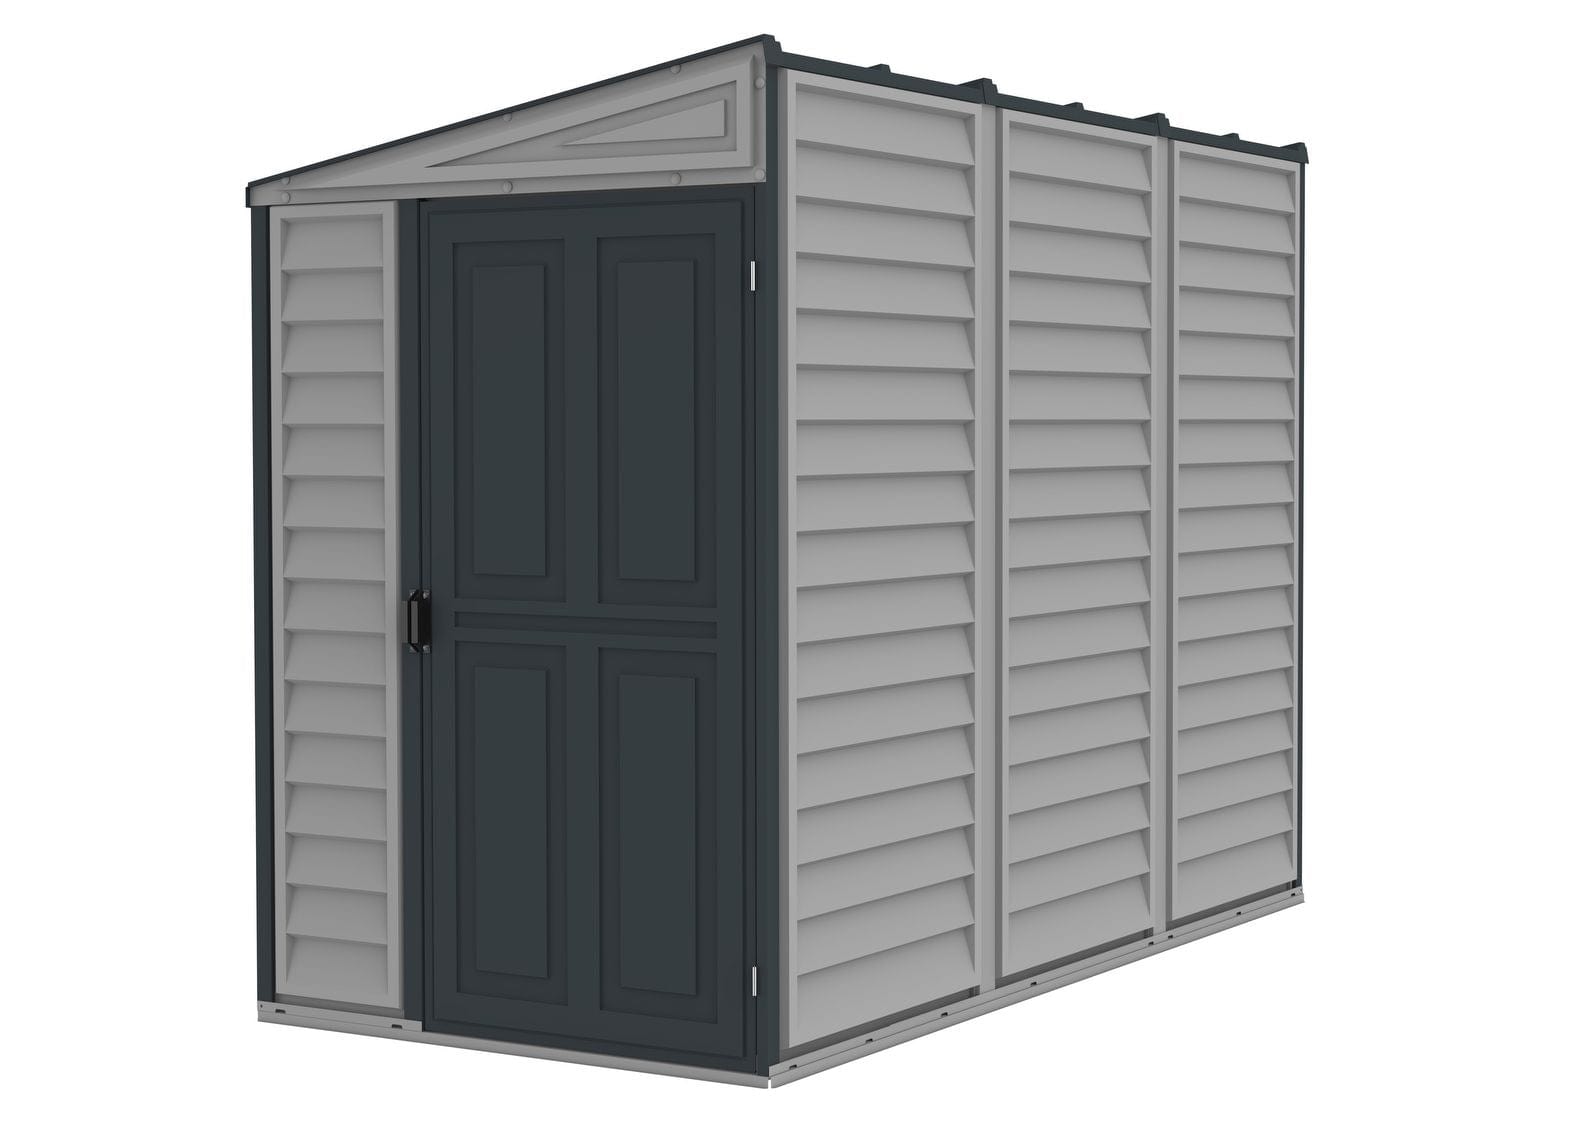 Duramax 4' x 8' SideMate Shed with Foundation